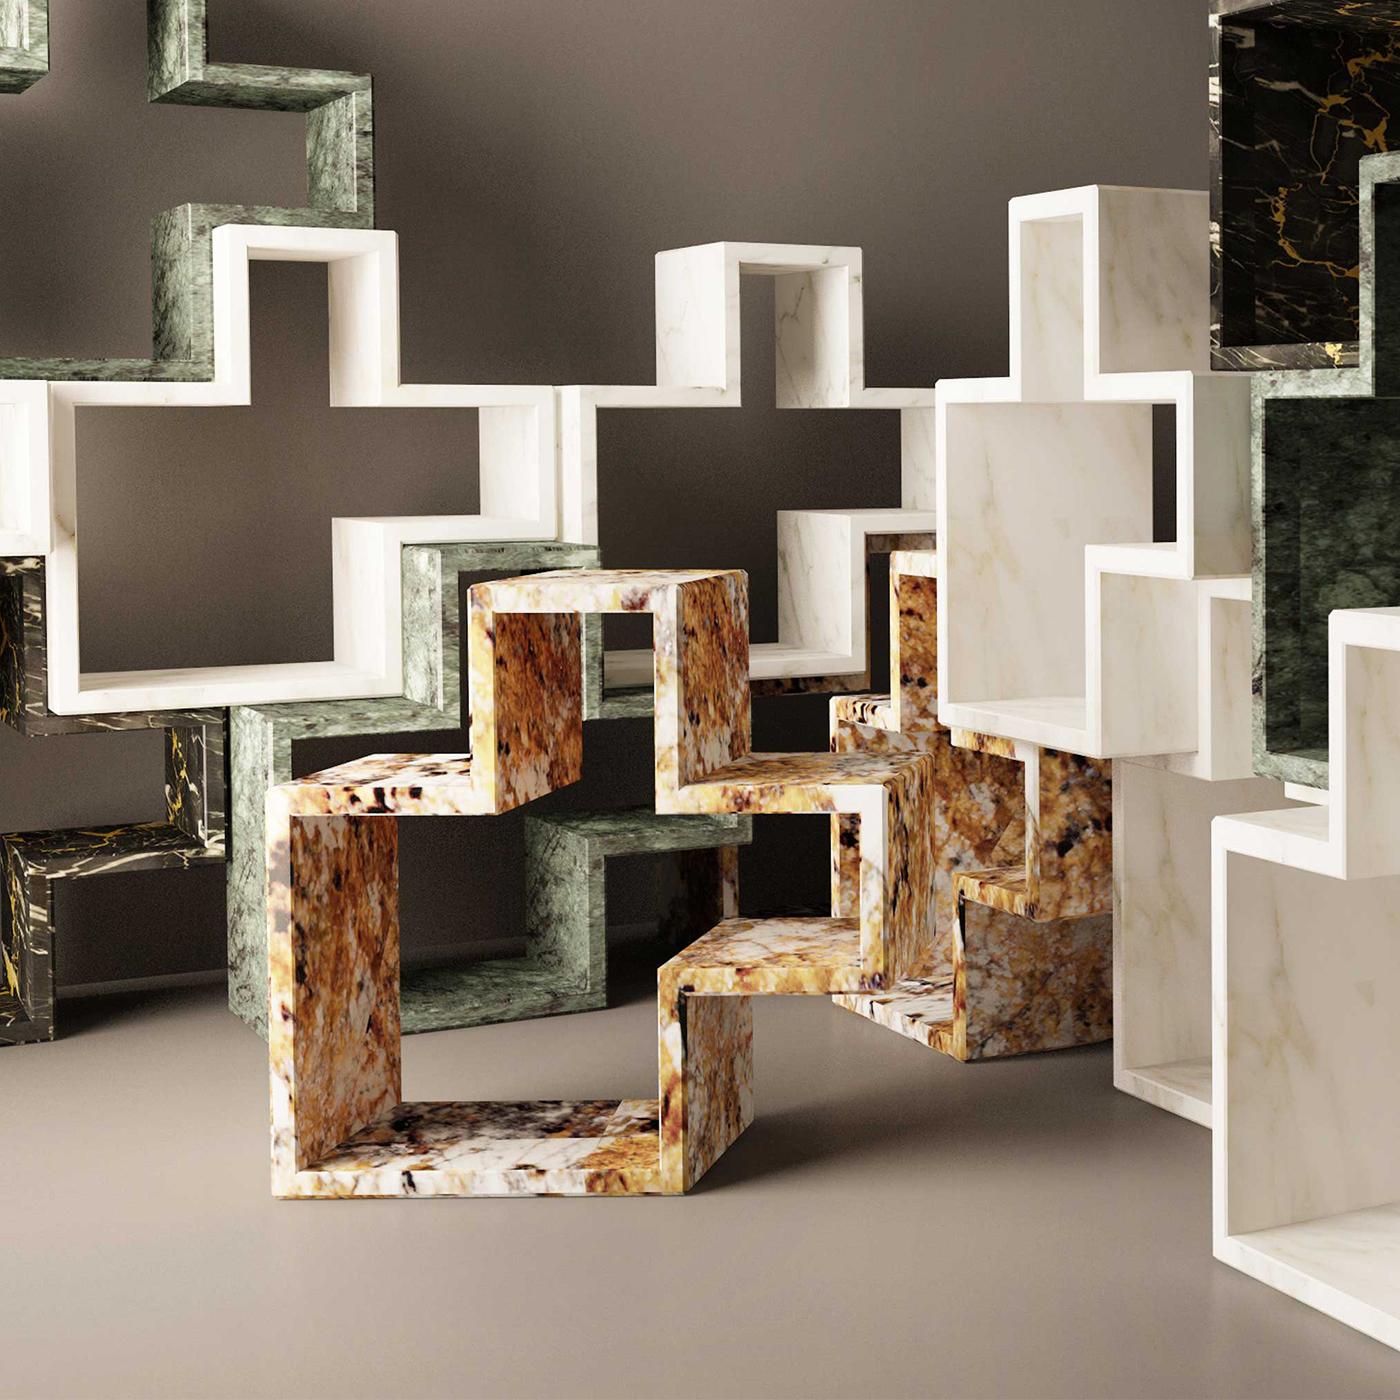 Diverse functionality converges with an opulent yet contemporary aesthetic in this high-strength geometric structure designed by Studio Formart. Crafted from rare Paonazzo marble slabs in a range of rich natural grains from Carrara, this piece